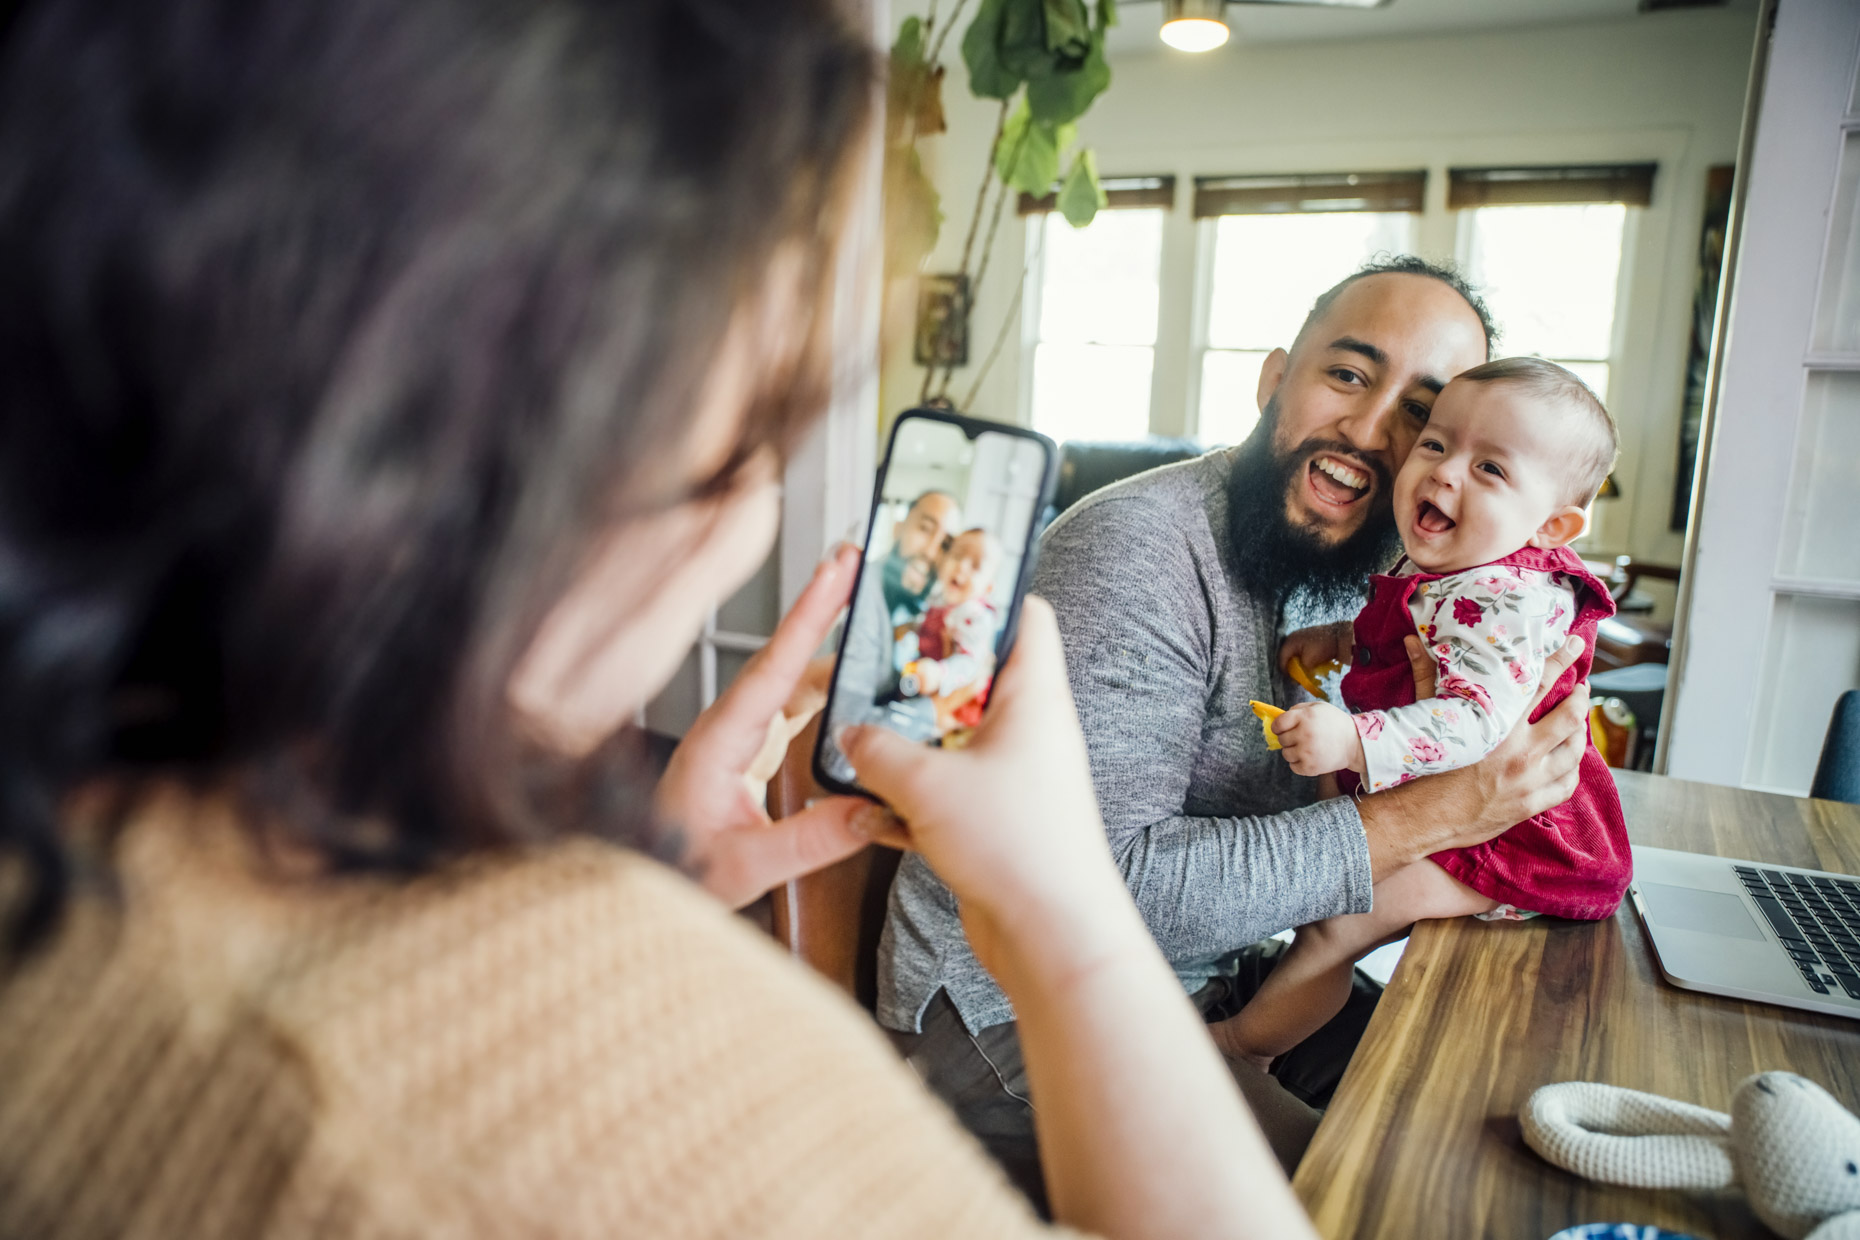 Woman taking photo of man and smiling baby with cell phone